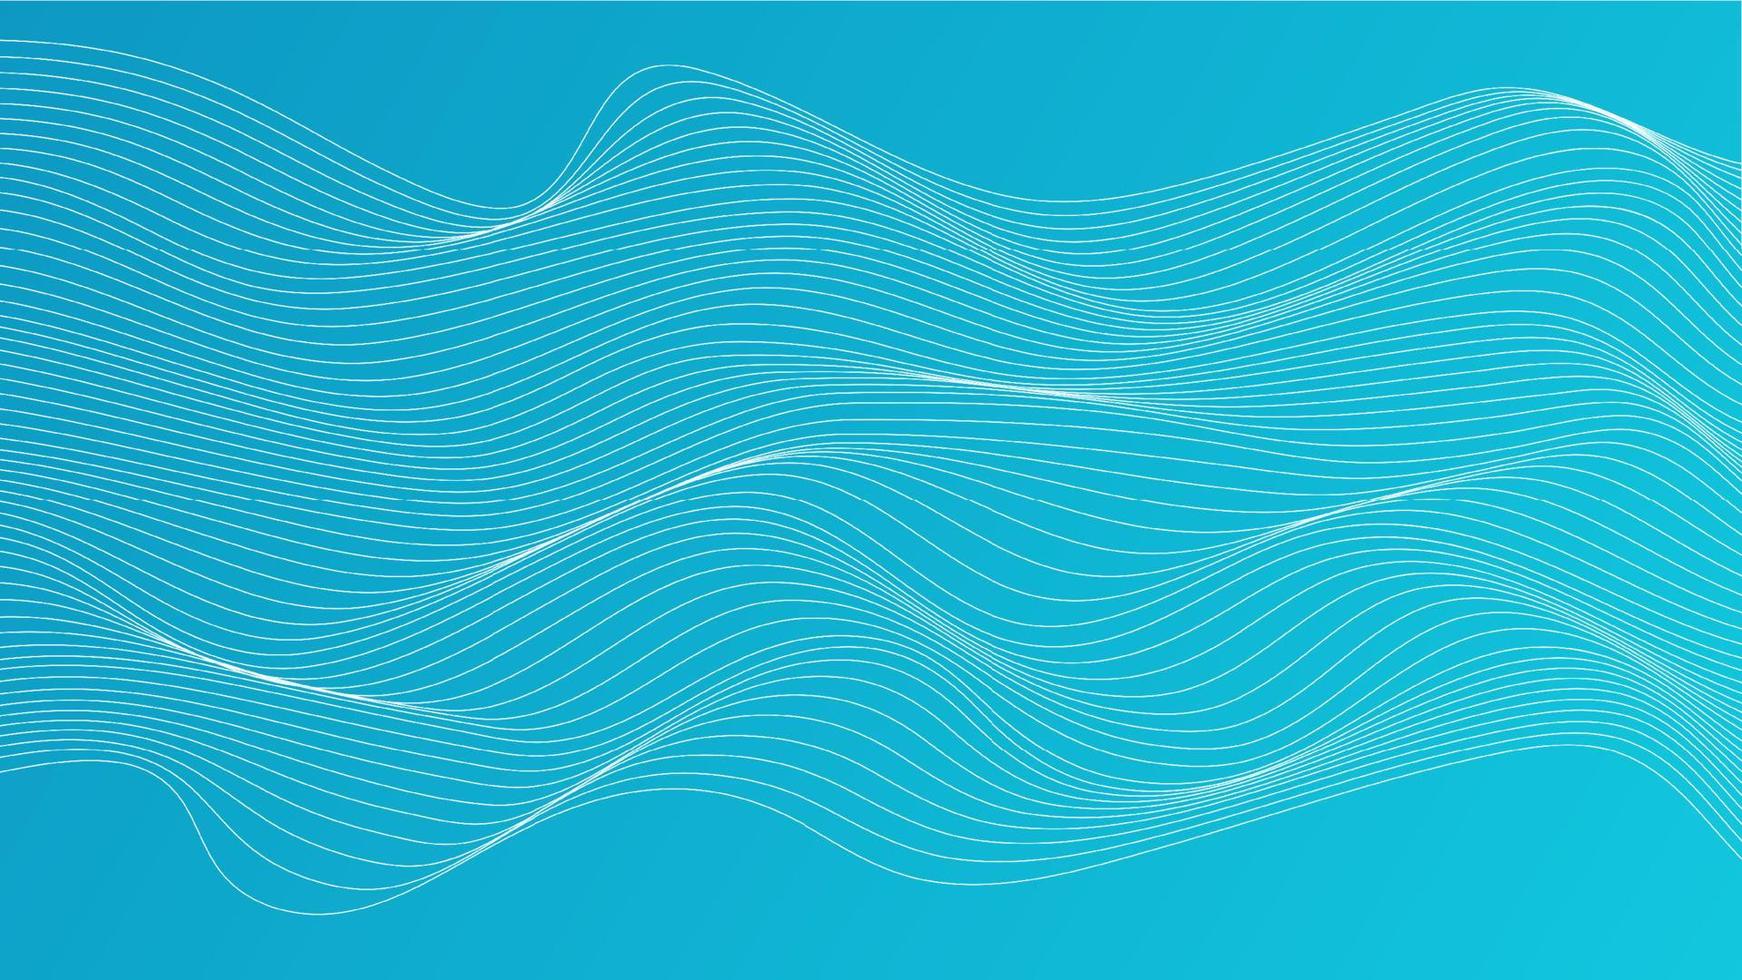 Abstract background with dynamic flowing lines vector